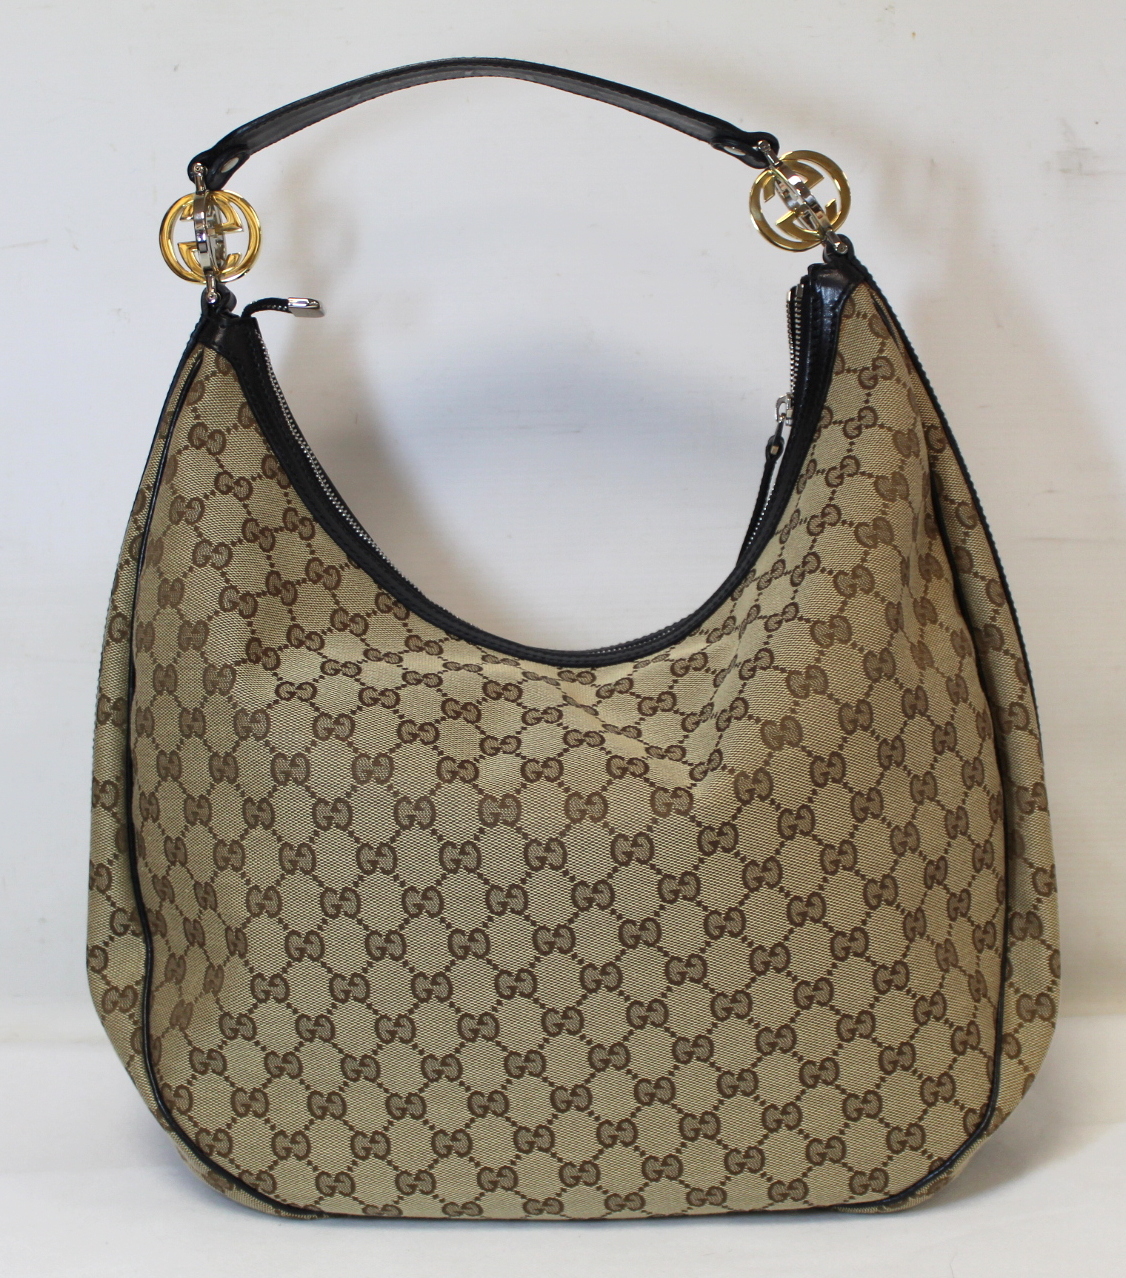 Gucci "Hobo" lady's handbag in beige and brown GG canvas with leather trim and handle and gold toned